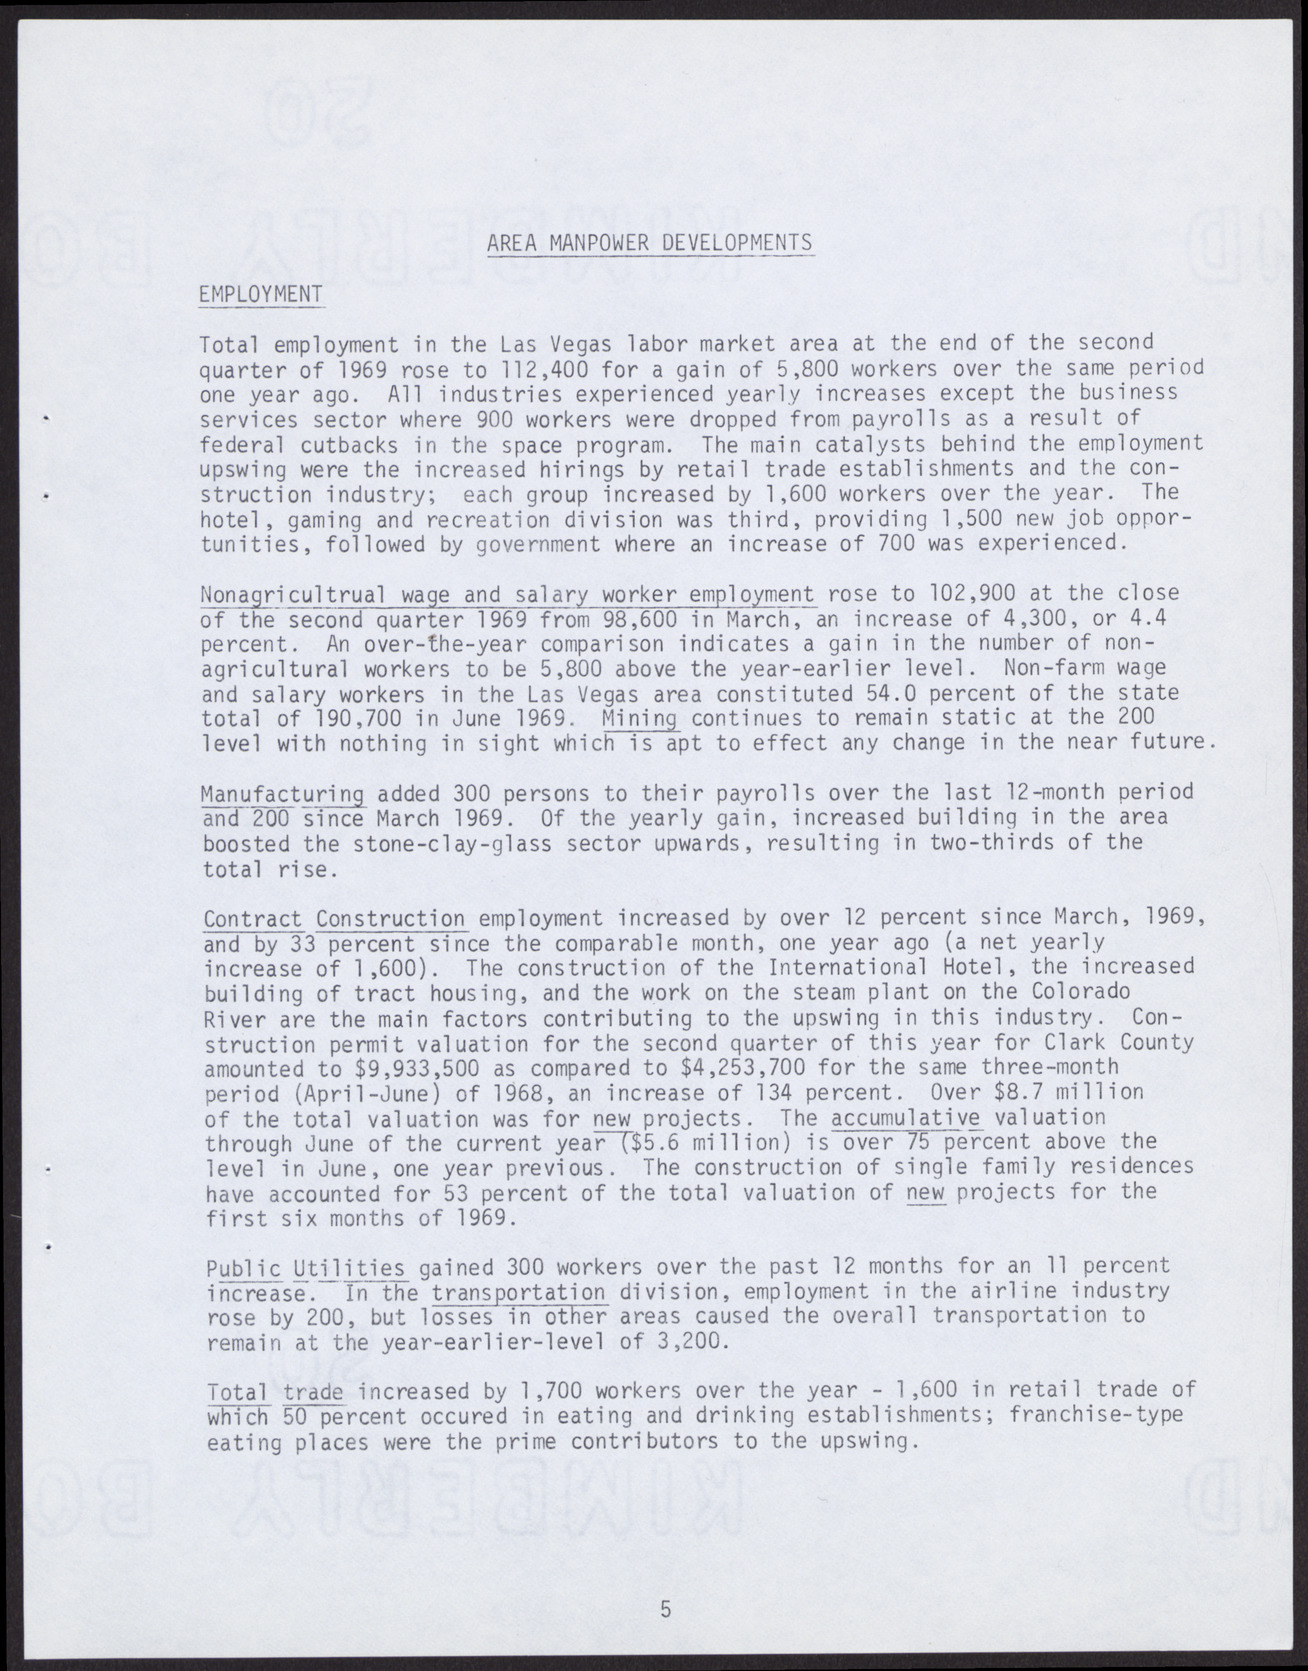 Semi-annual Area Manpower Review (16 pages), Fall 1969, page 8